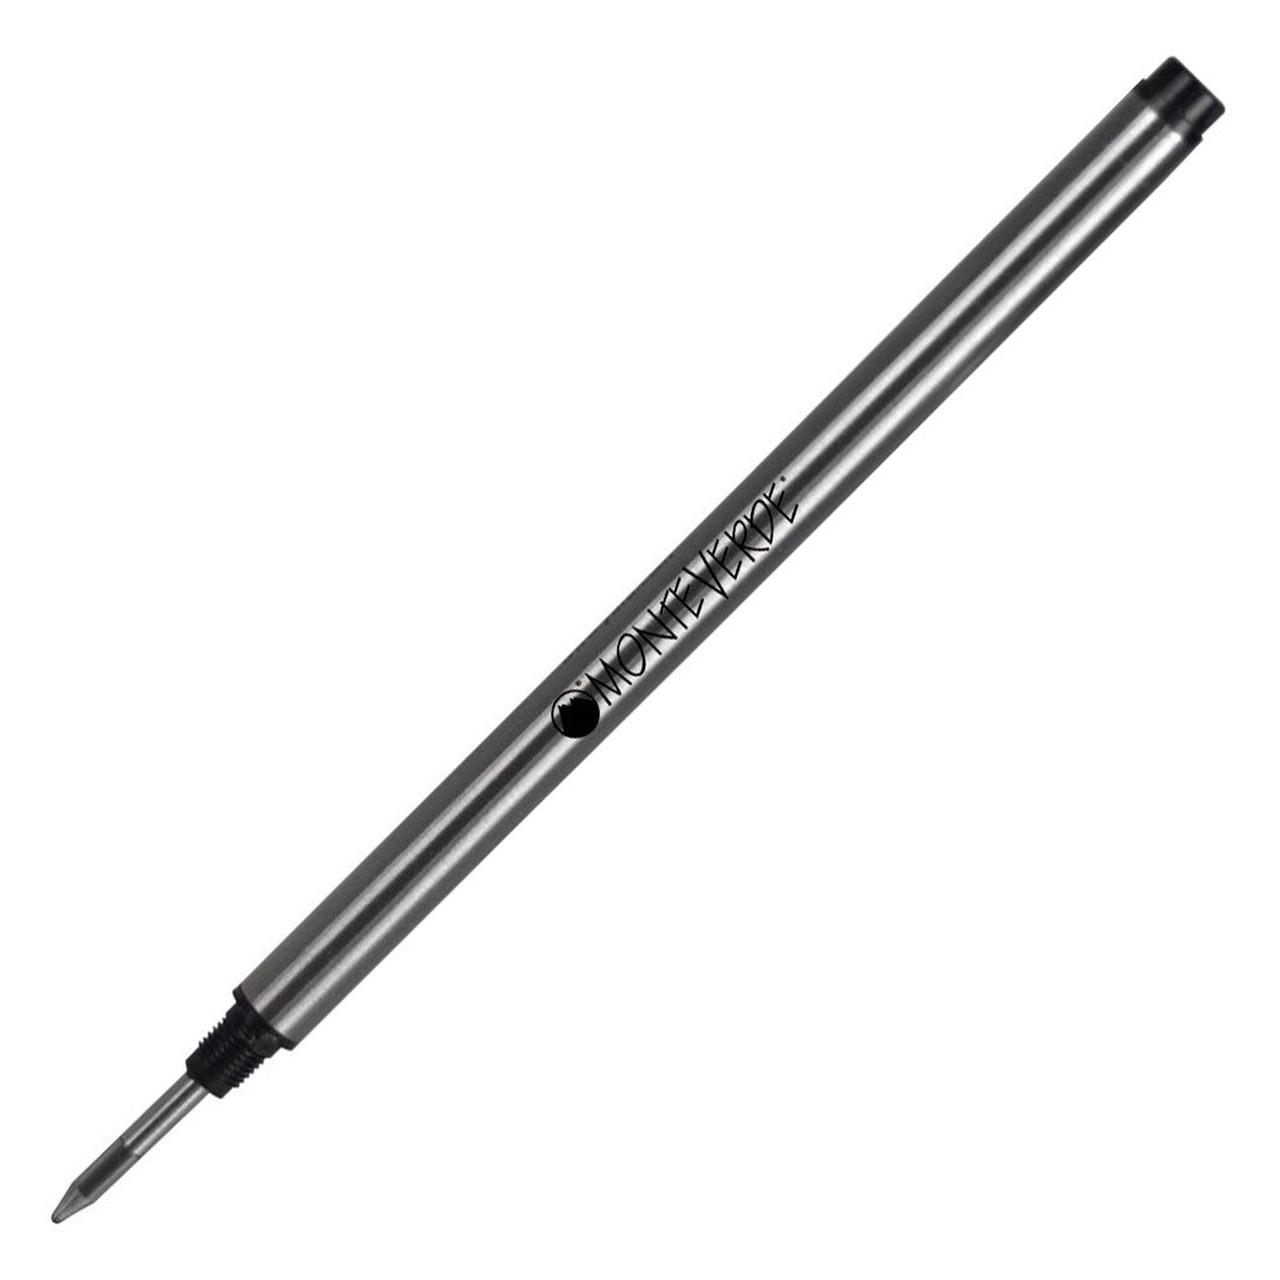 Monteverde USA® Soft Roll™ Ballpoint Refill To Fit Montblanc